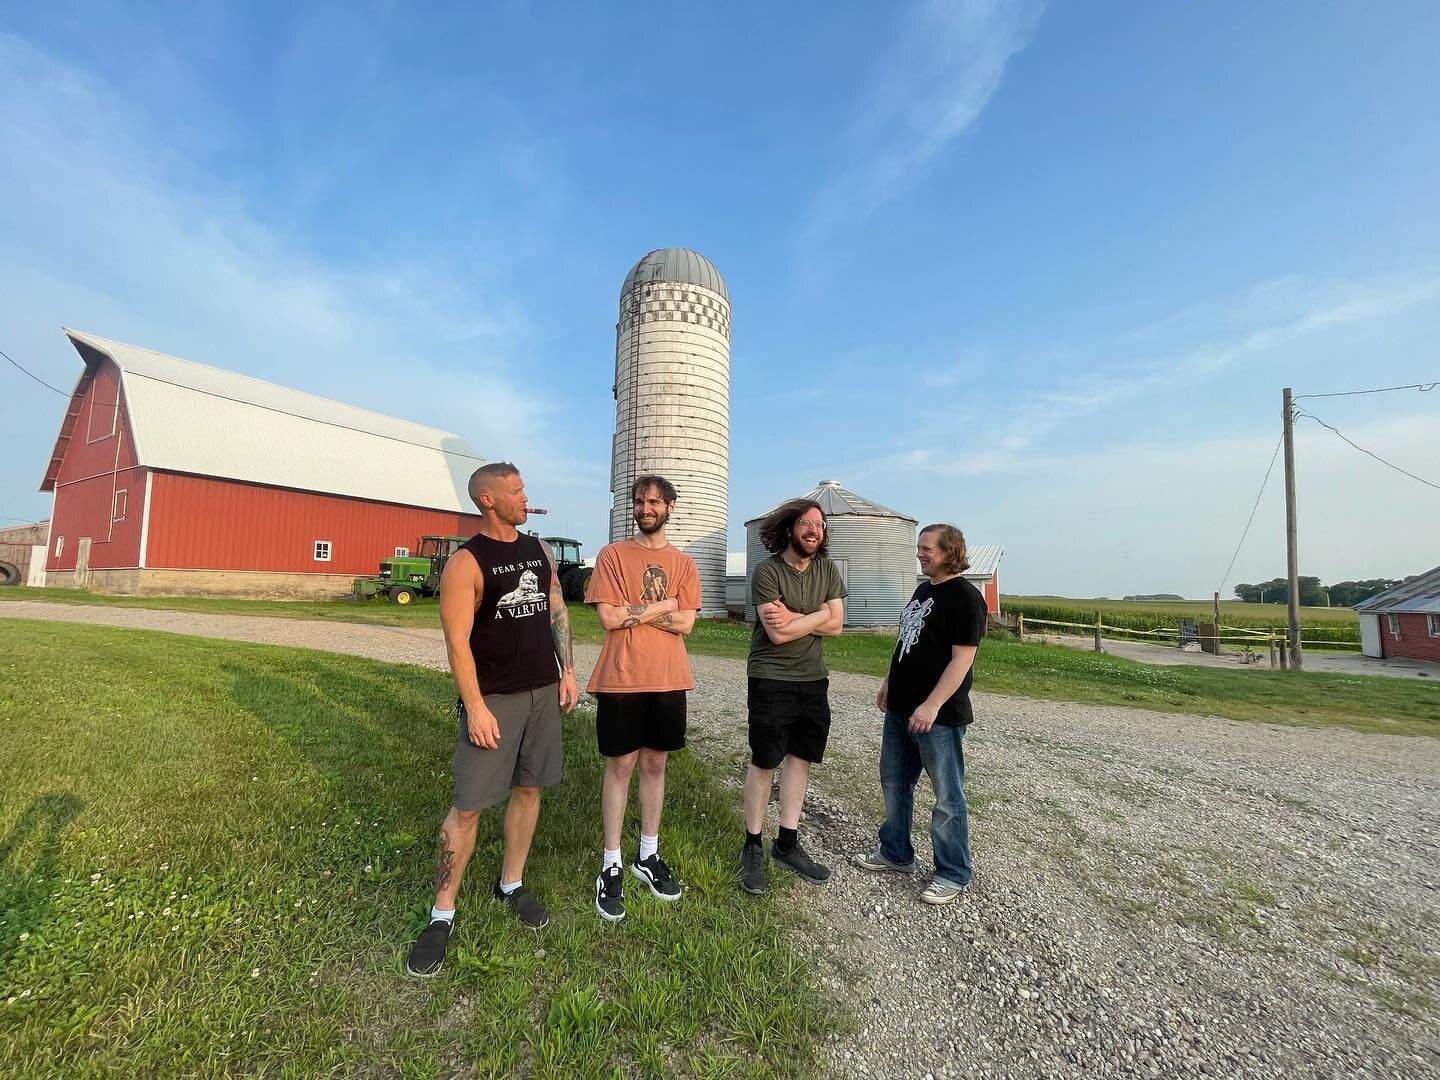 As corn-fed Iowans, it was only a matter of time before we played a gig on a farm. Thanks to Joel Schwichtenberg for organizing Finch Fest '23 and having us on the bill! Tonight we play at @xbklive with @kingbartlettmusic ! Photos by @dottedeyephoto 